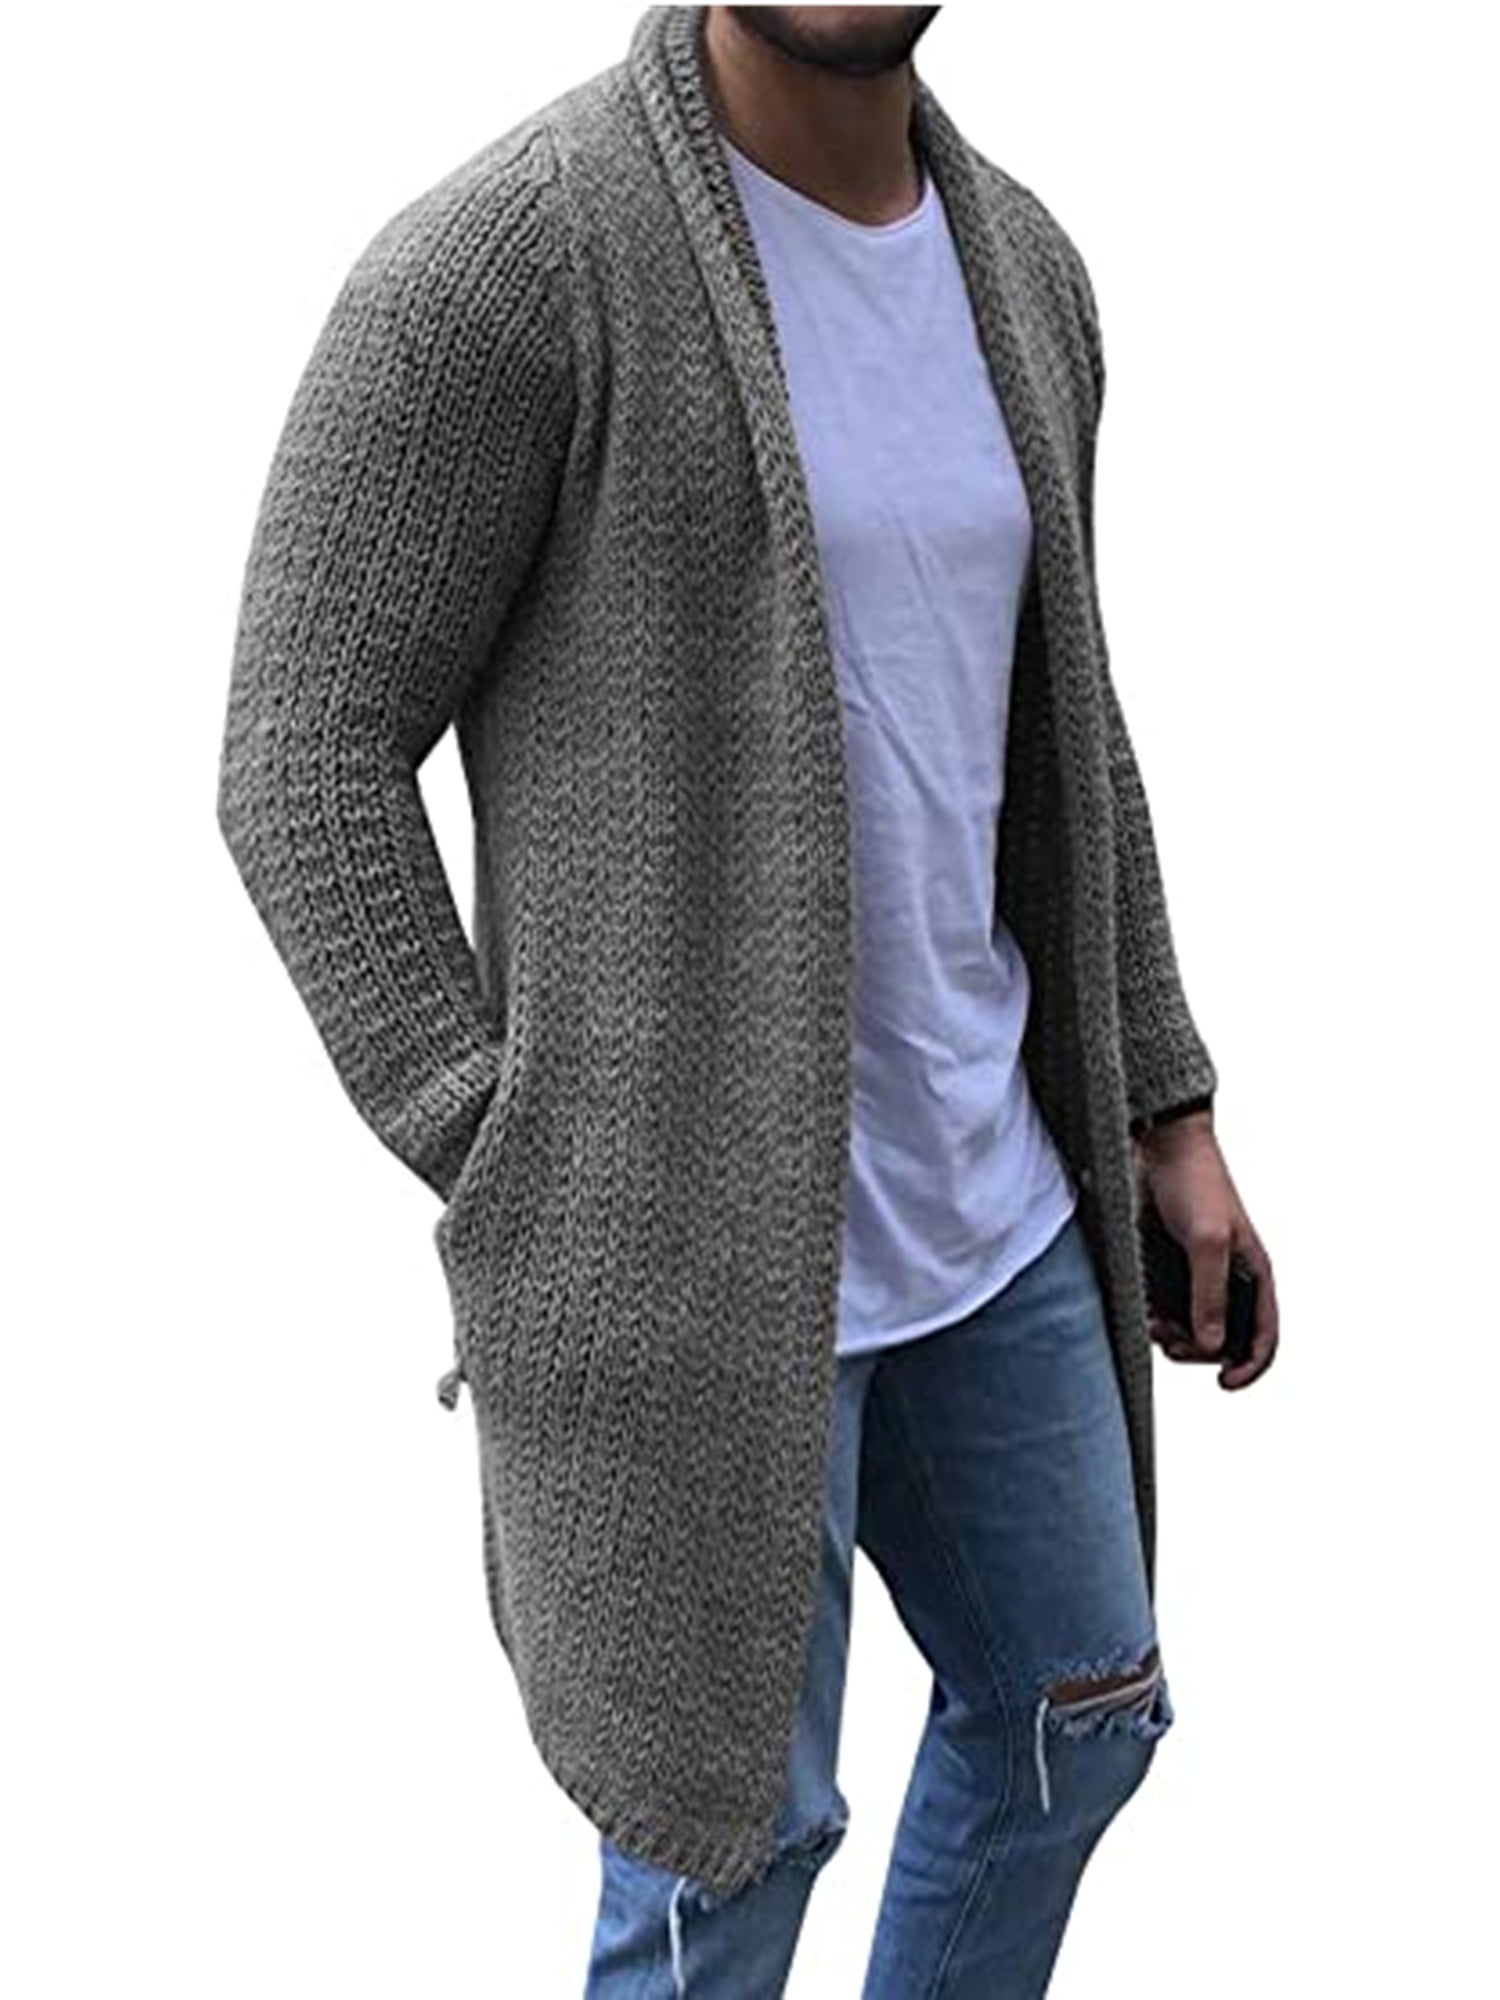 Coolred-Men Knit Juniors Winter Plus Size Mid-Long Cardigan Sweater 